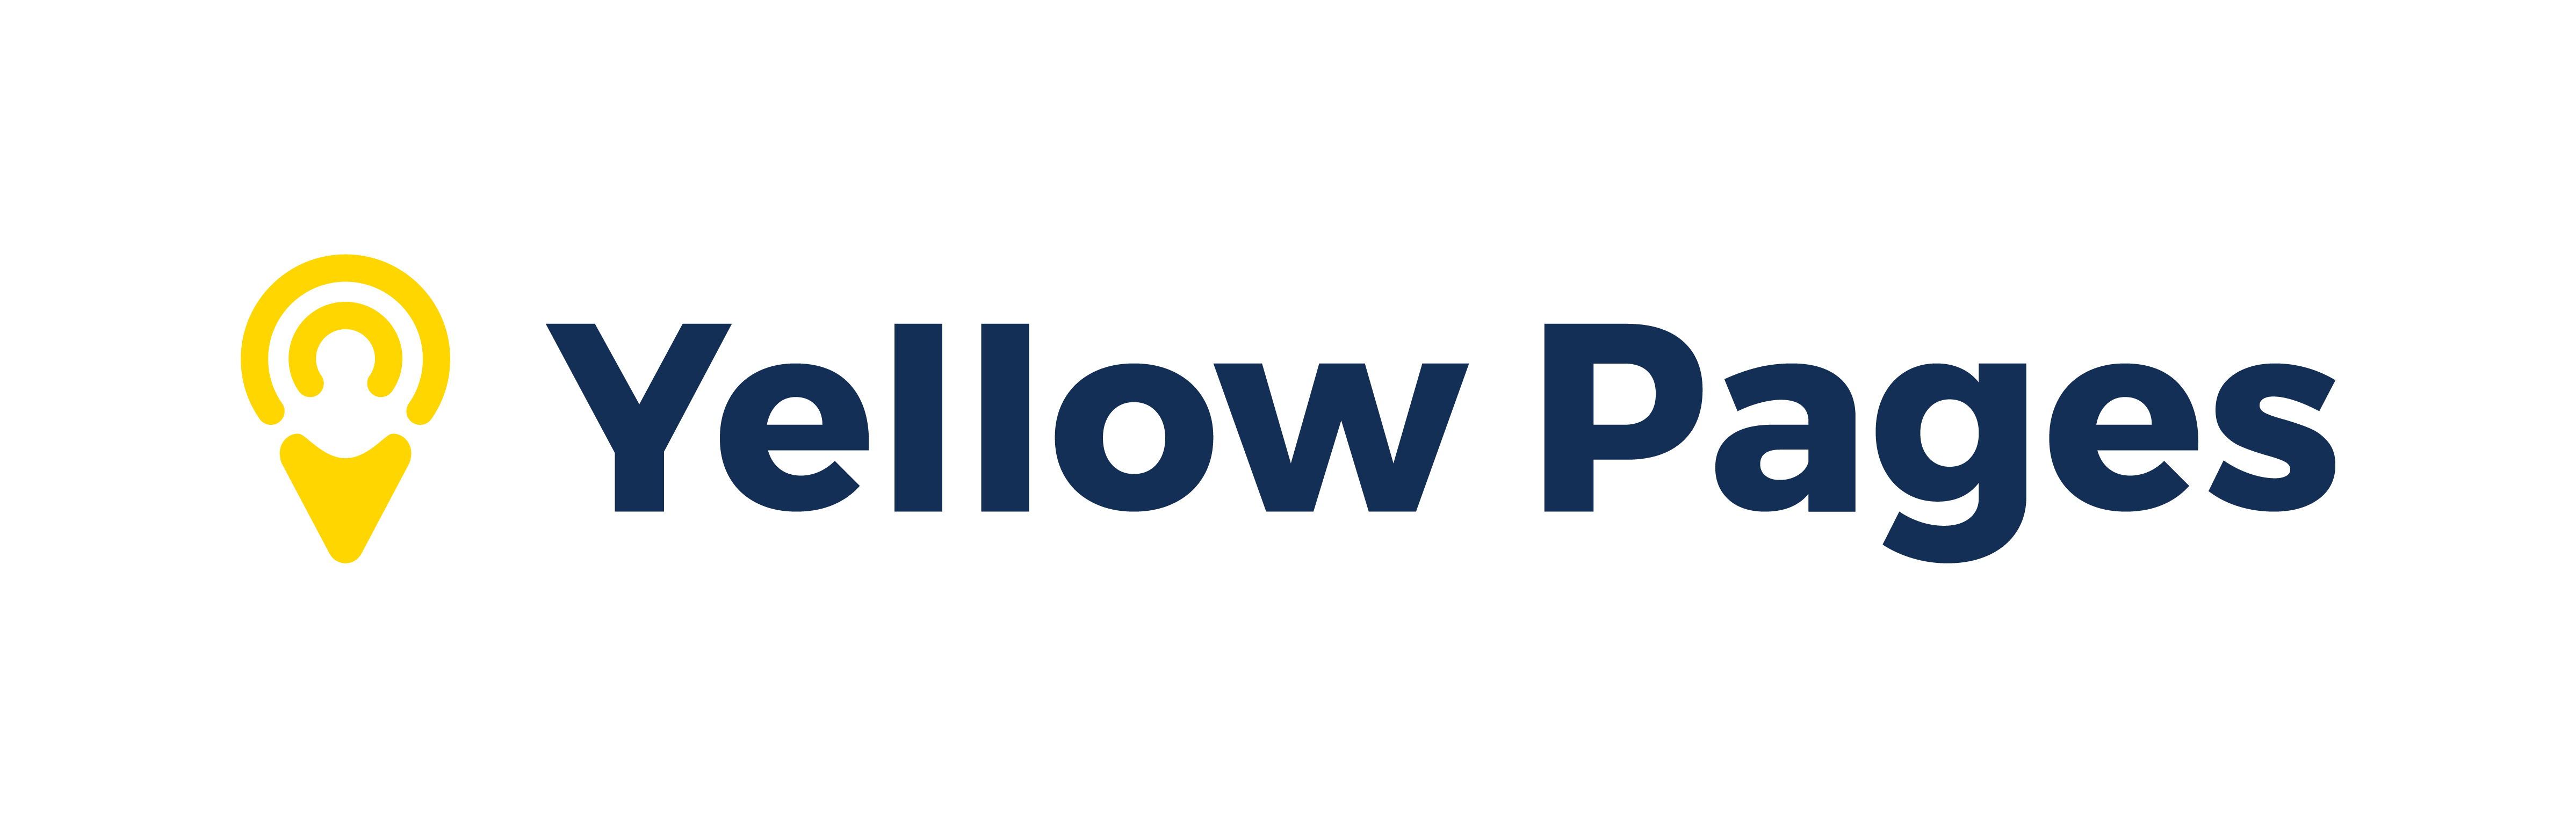 Yellow Pages Network logo